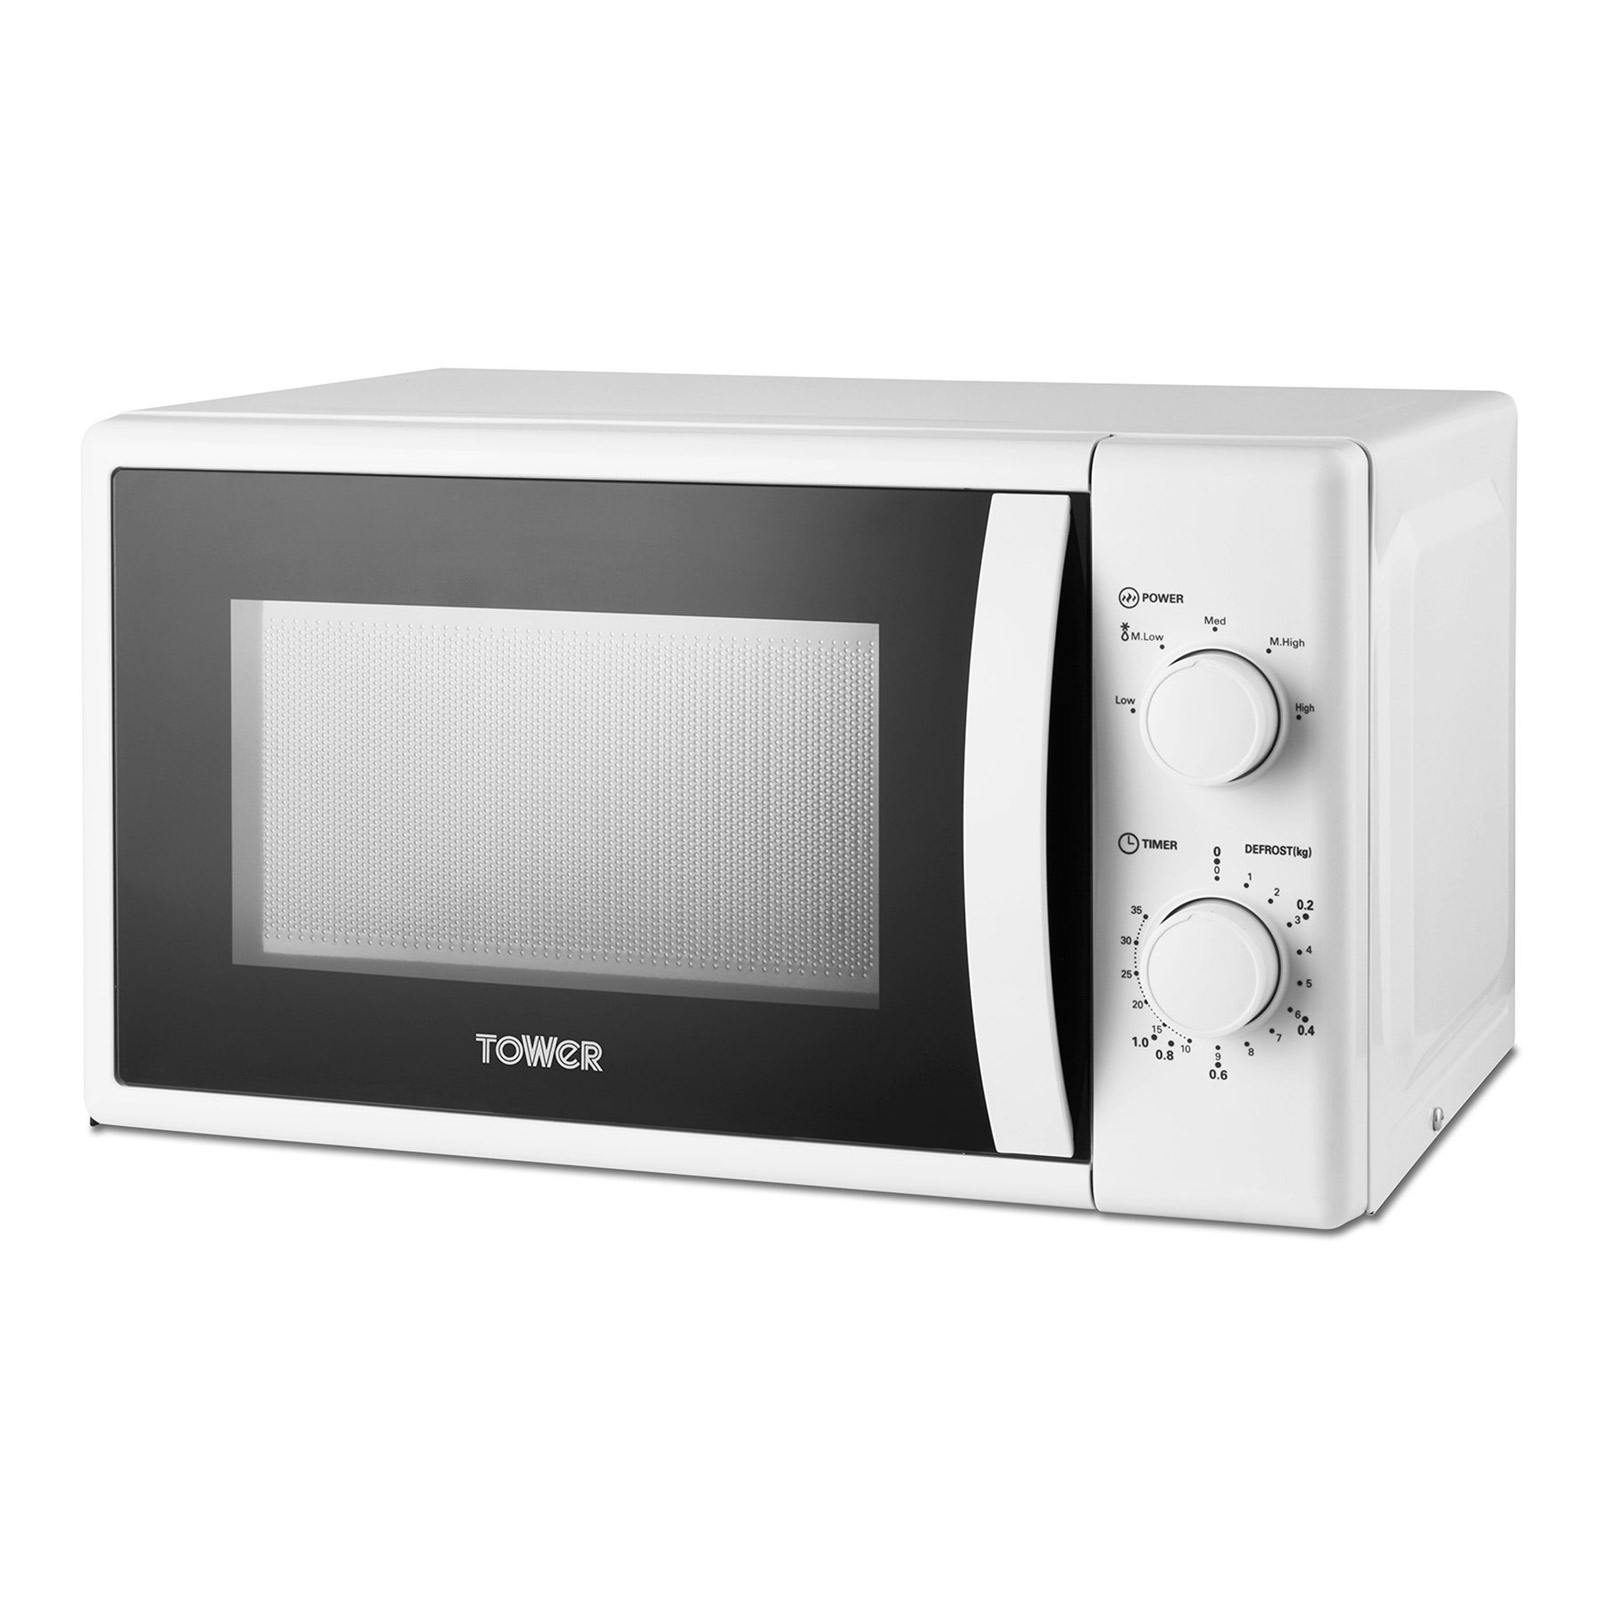 cornell microwave oven 23l